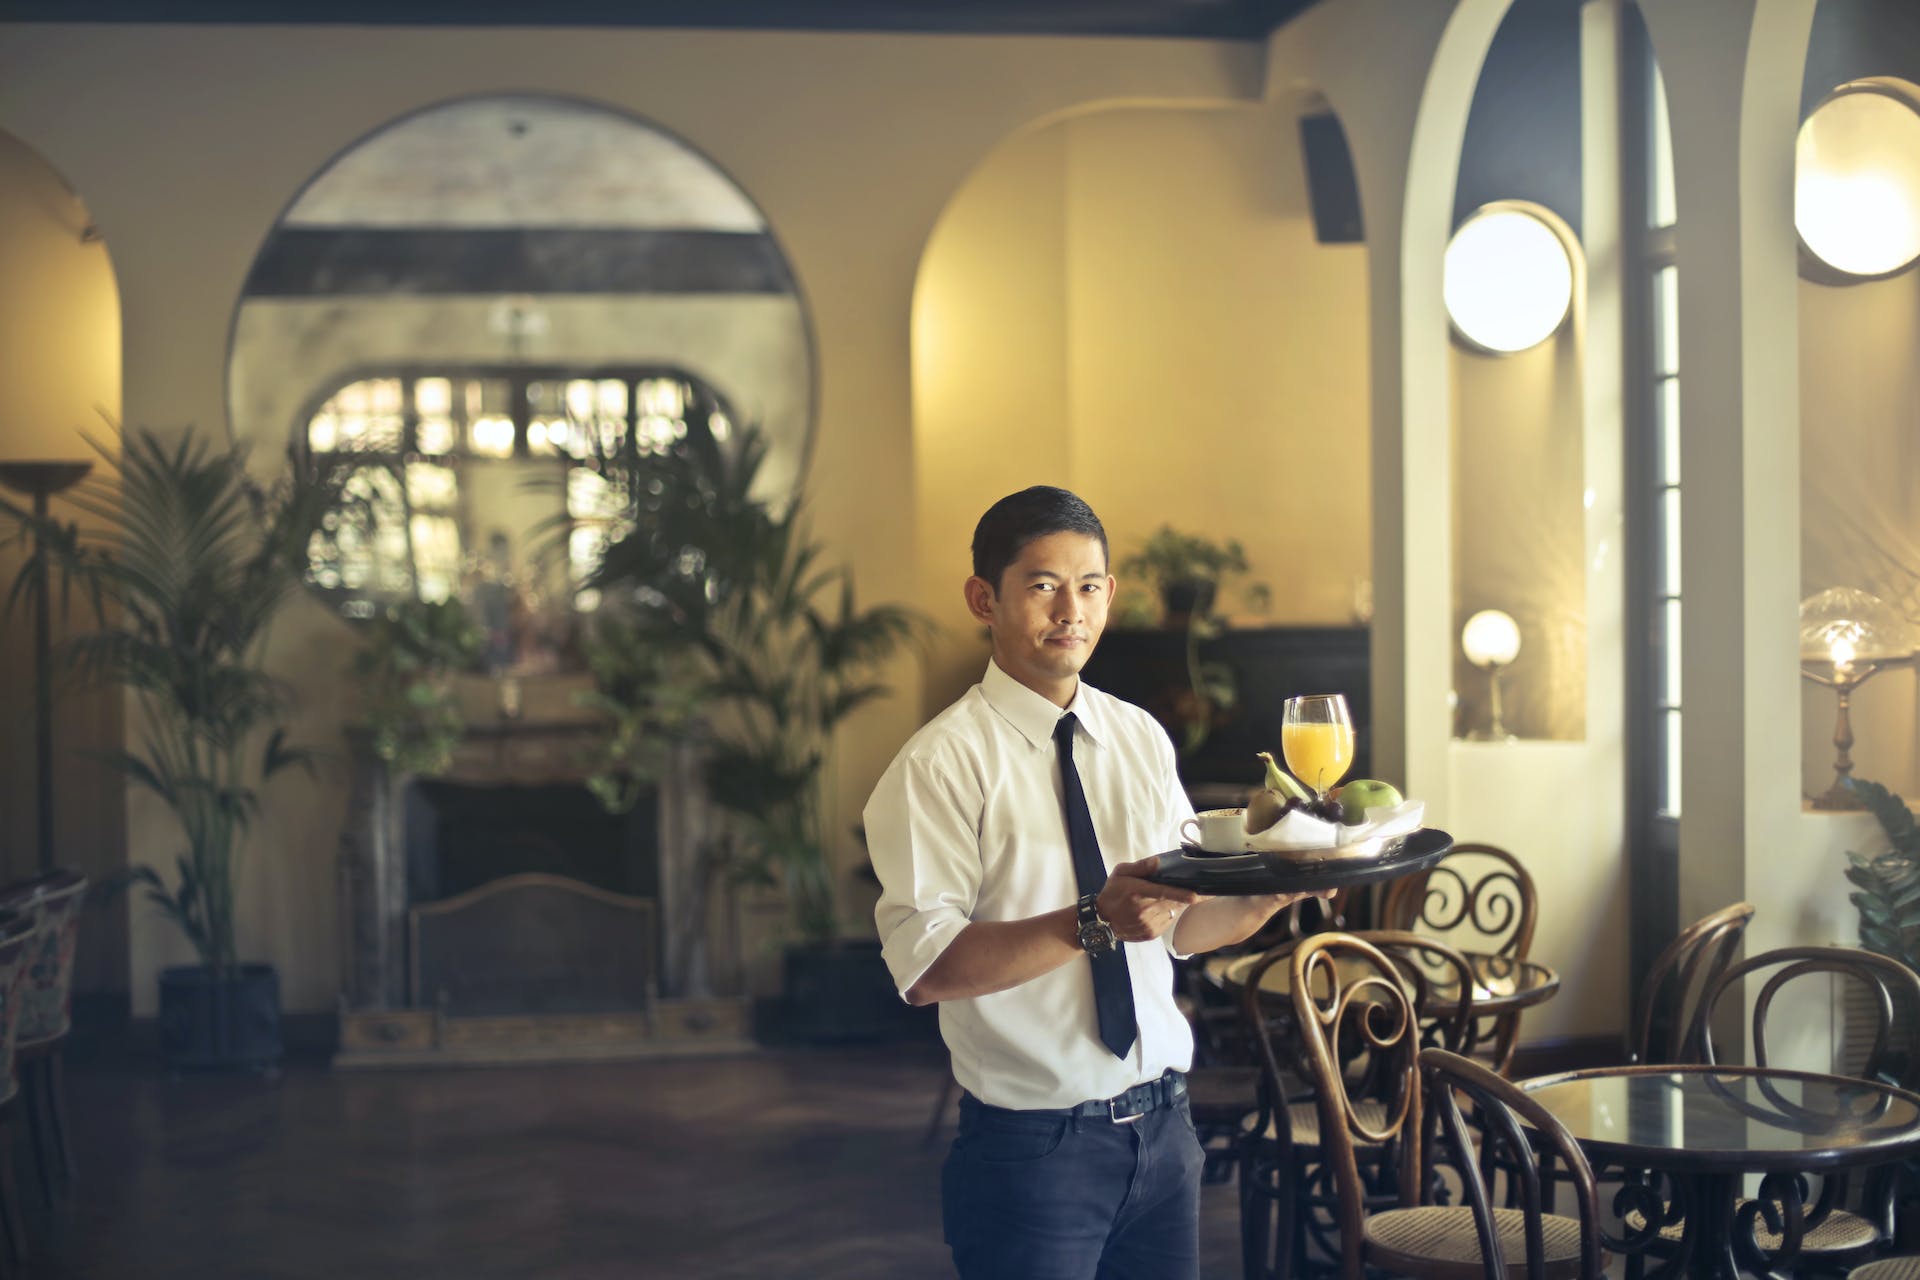 A waiter in a restaurant | Source: Pexels